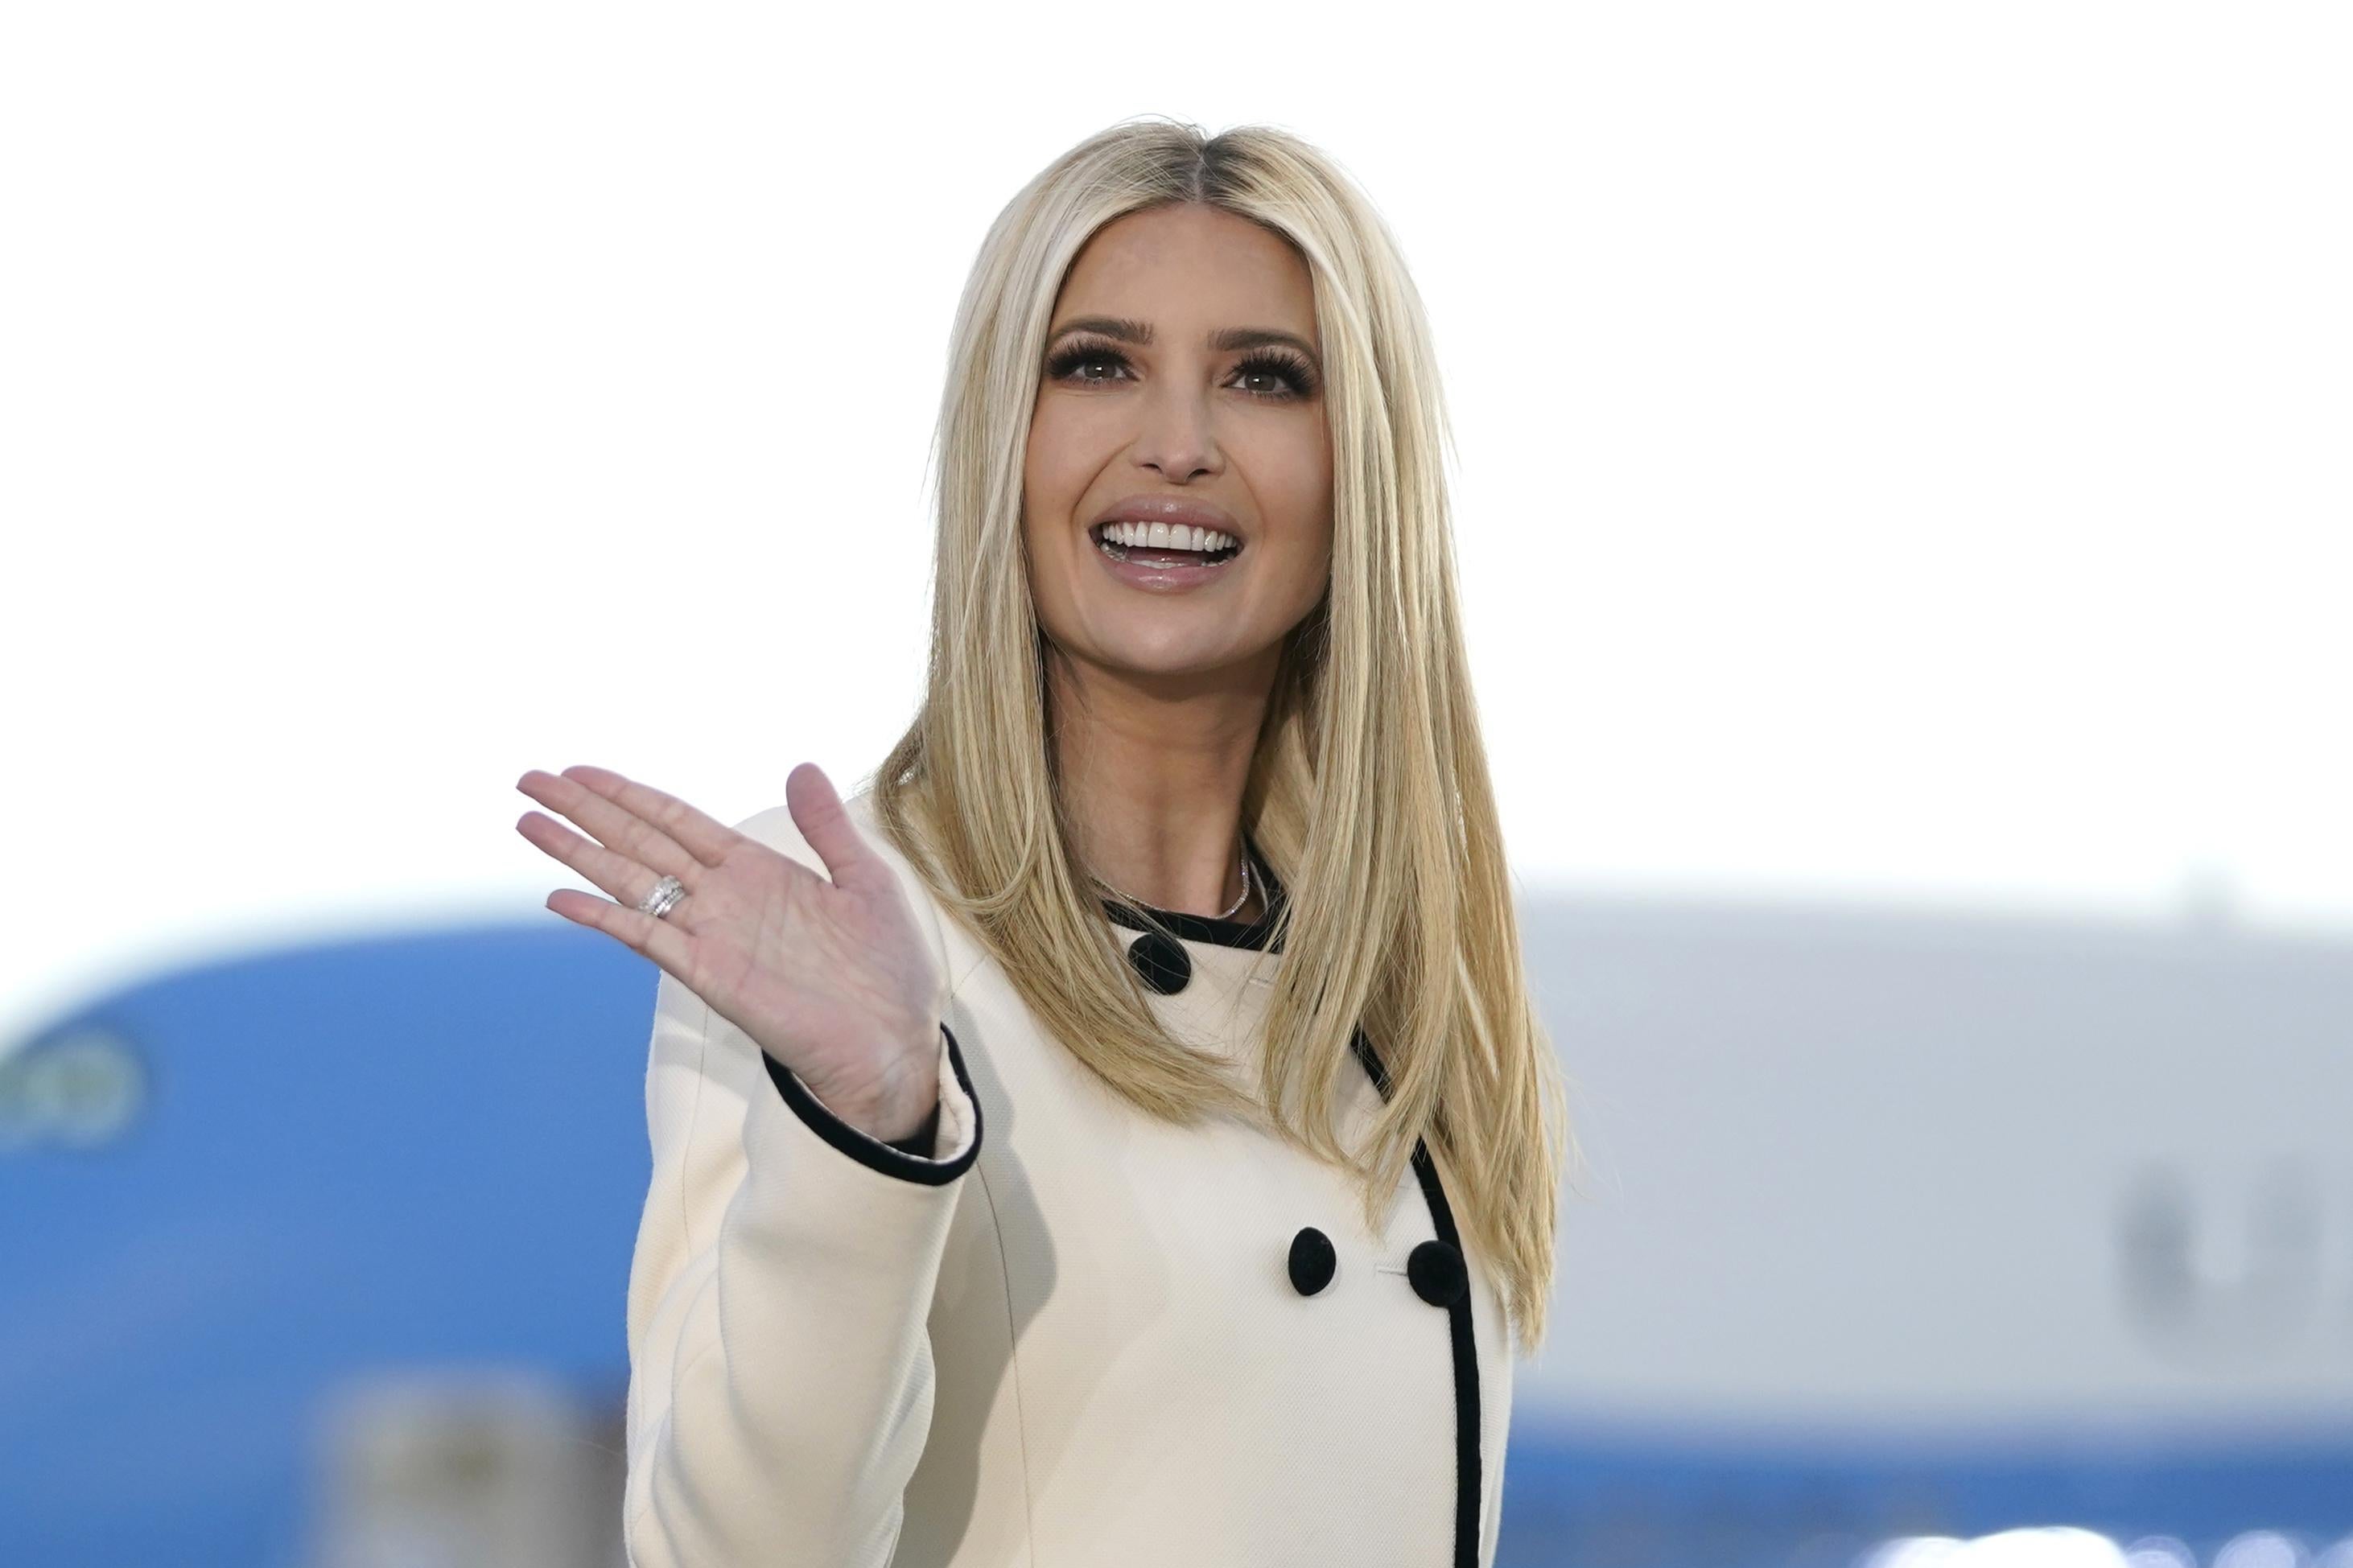 Ivanka Trump waves as she arrives at Joint Base Andrews in Maryland for US President Donald Trump's departure on Jan. 20.